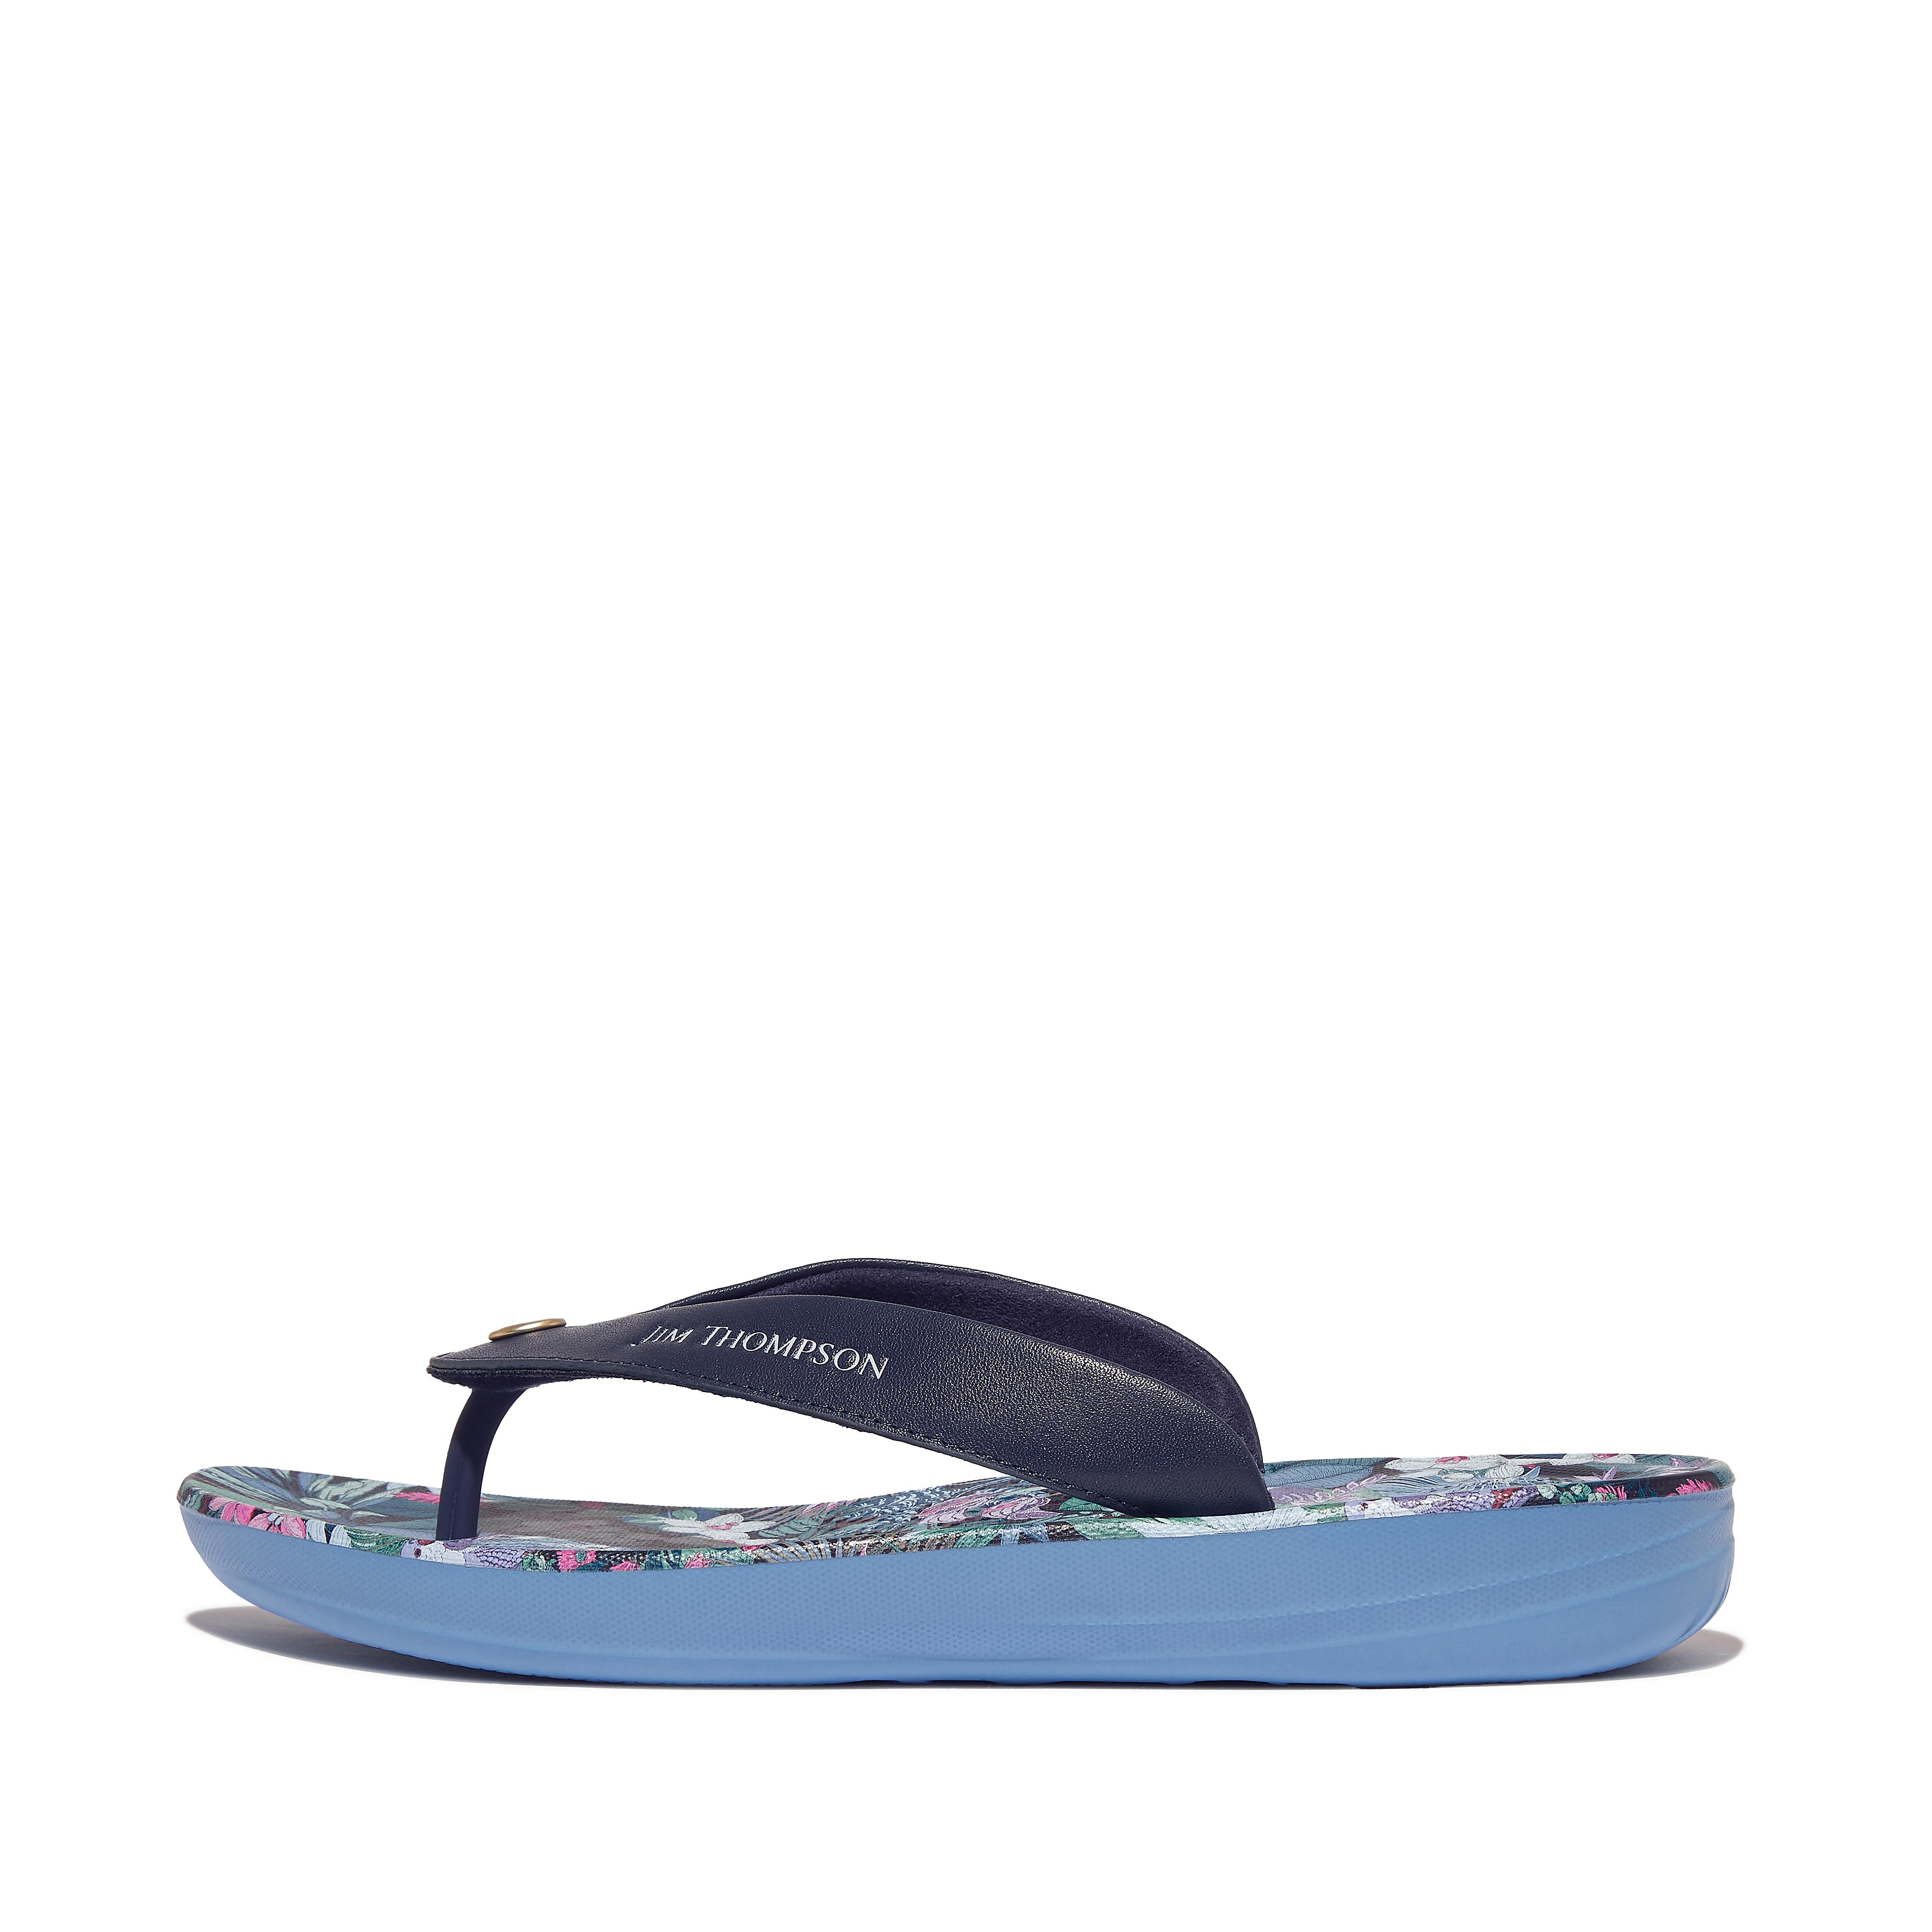 Fitflop X Jim Thompson Limited-Edition Leather Flip-Flops,heritage blue